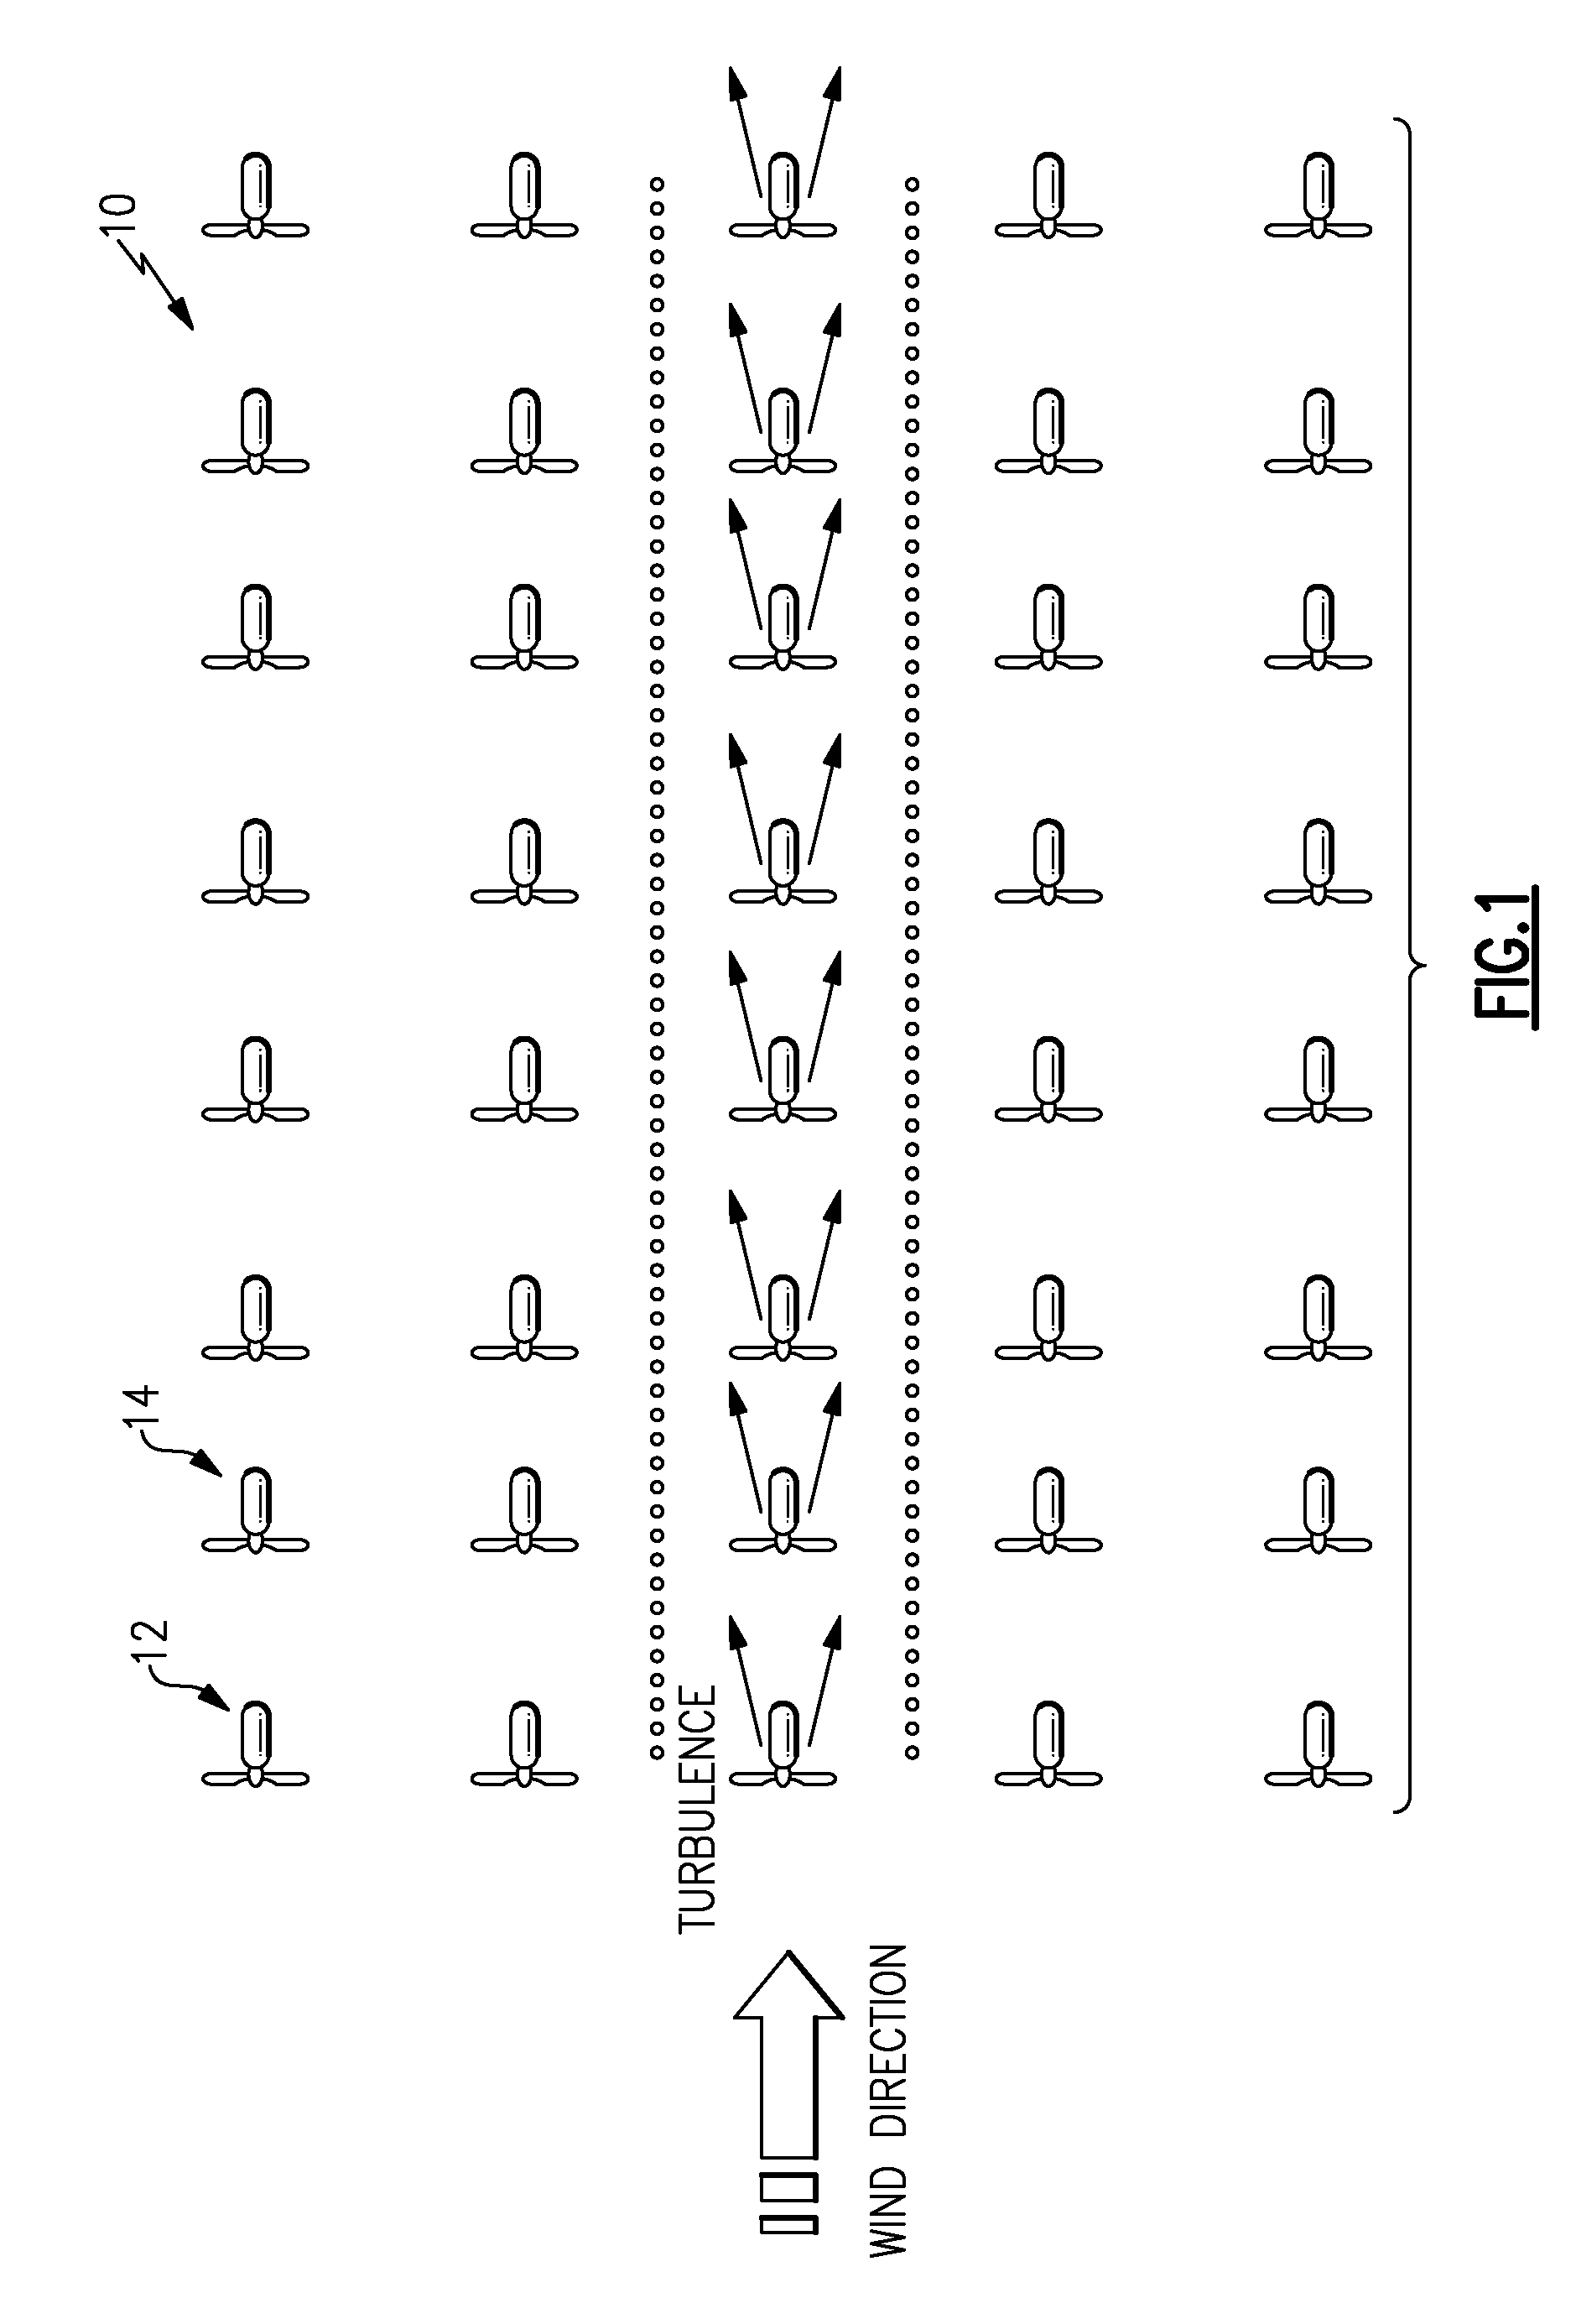 System and method for optimizing wake interaction between wind turbines